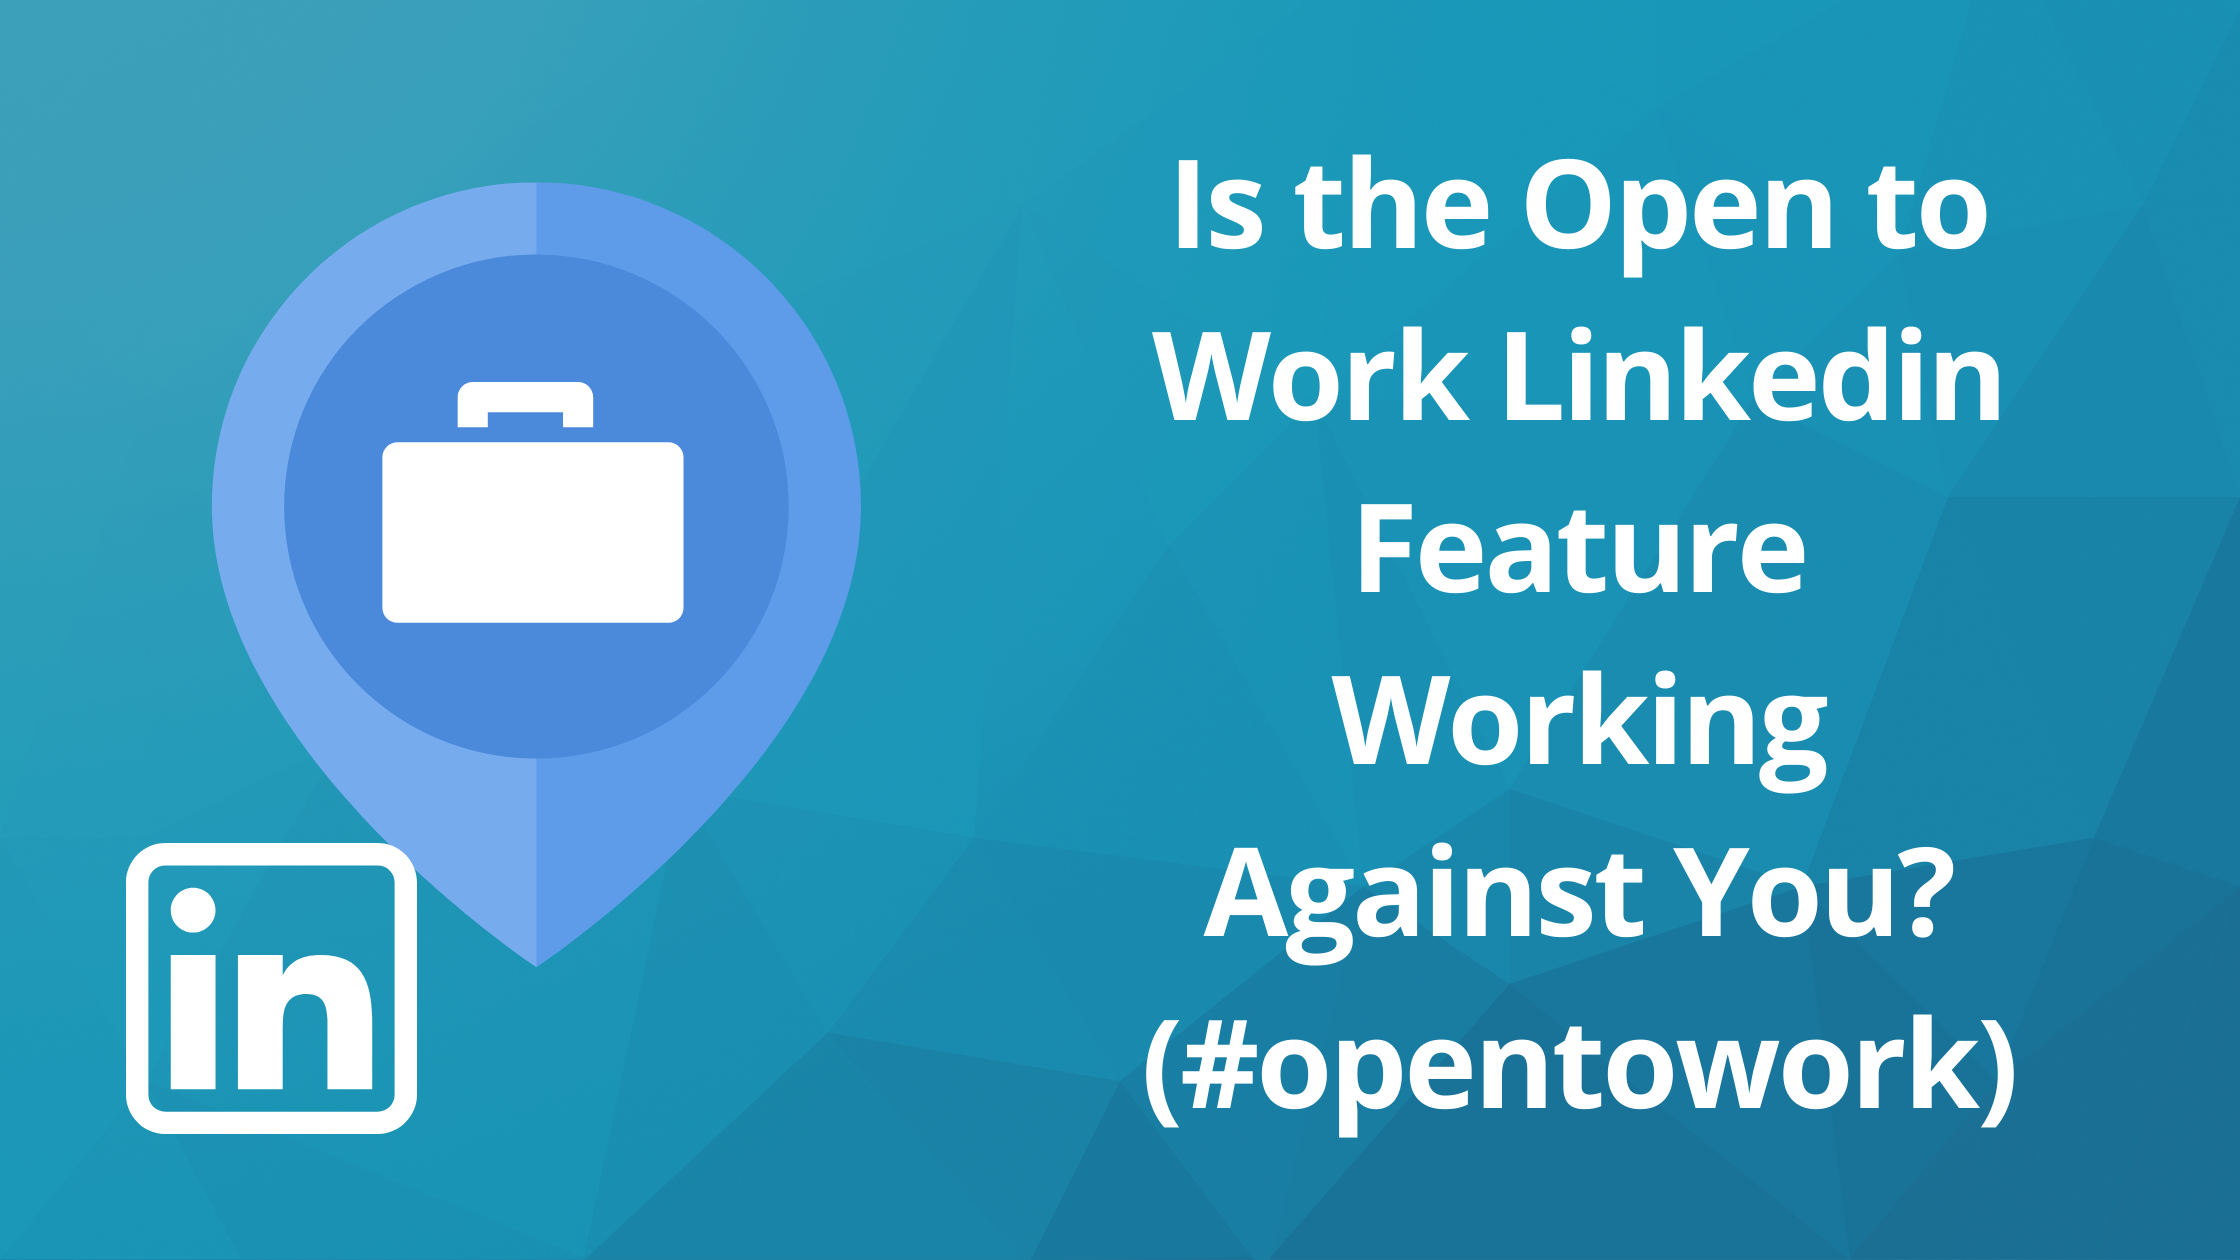 Is the Open to Work Linkedin Feature Working Against You? (#opentowork)